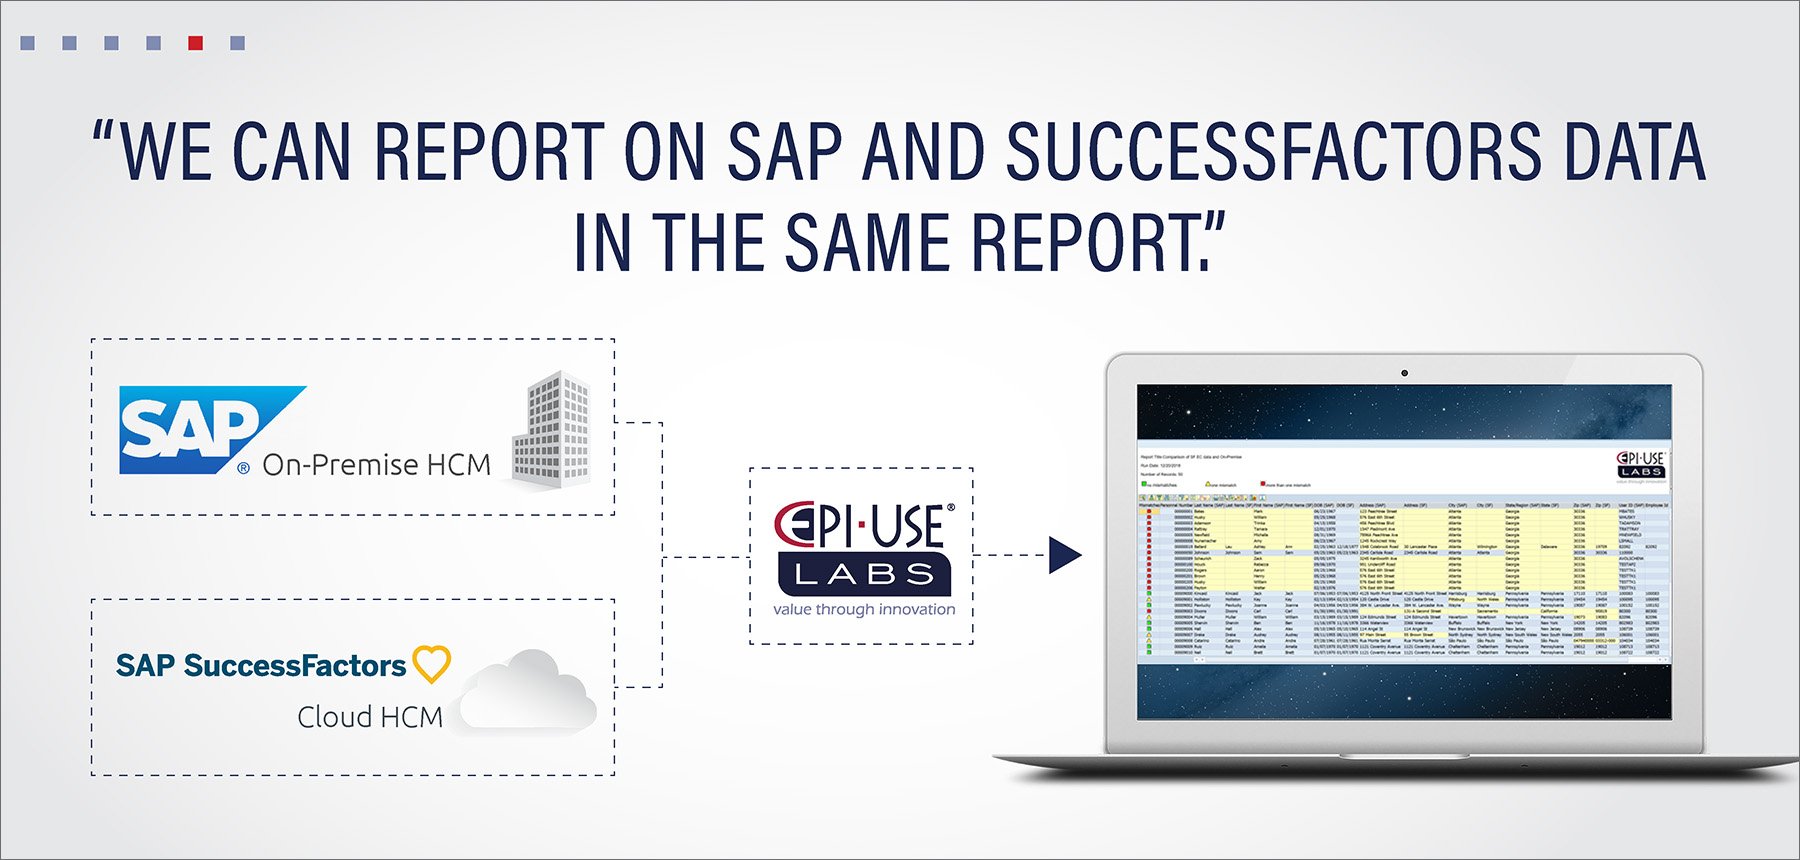 We can report on SAP and SuccessFactors data in the same report.